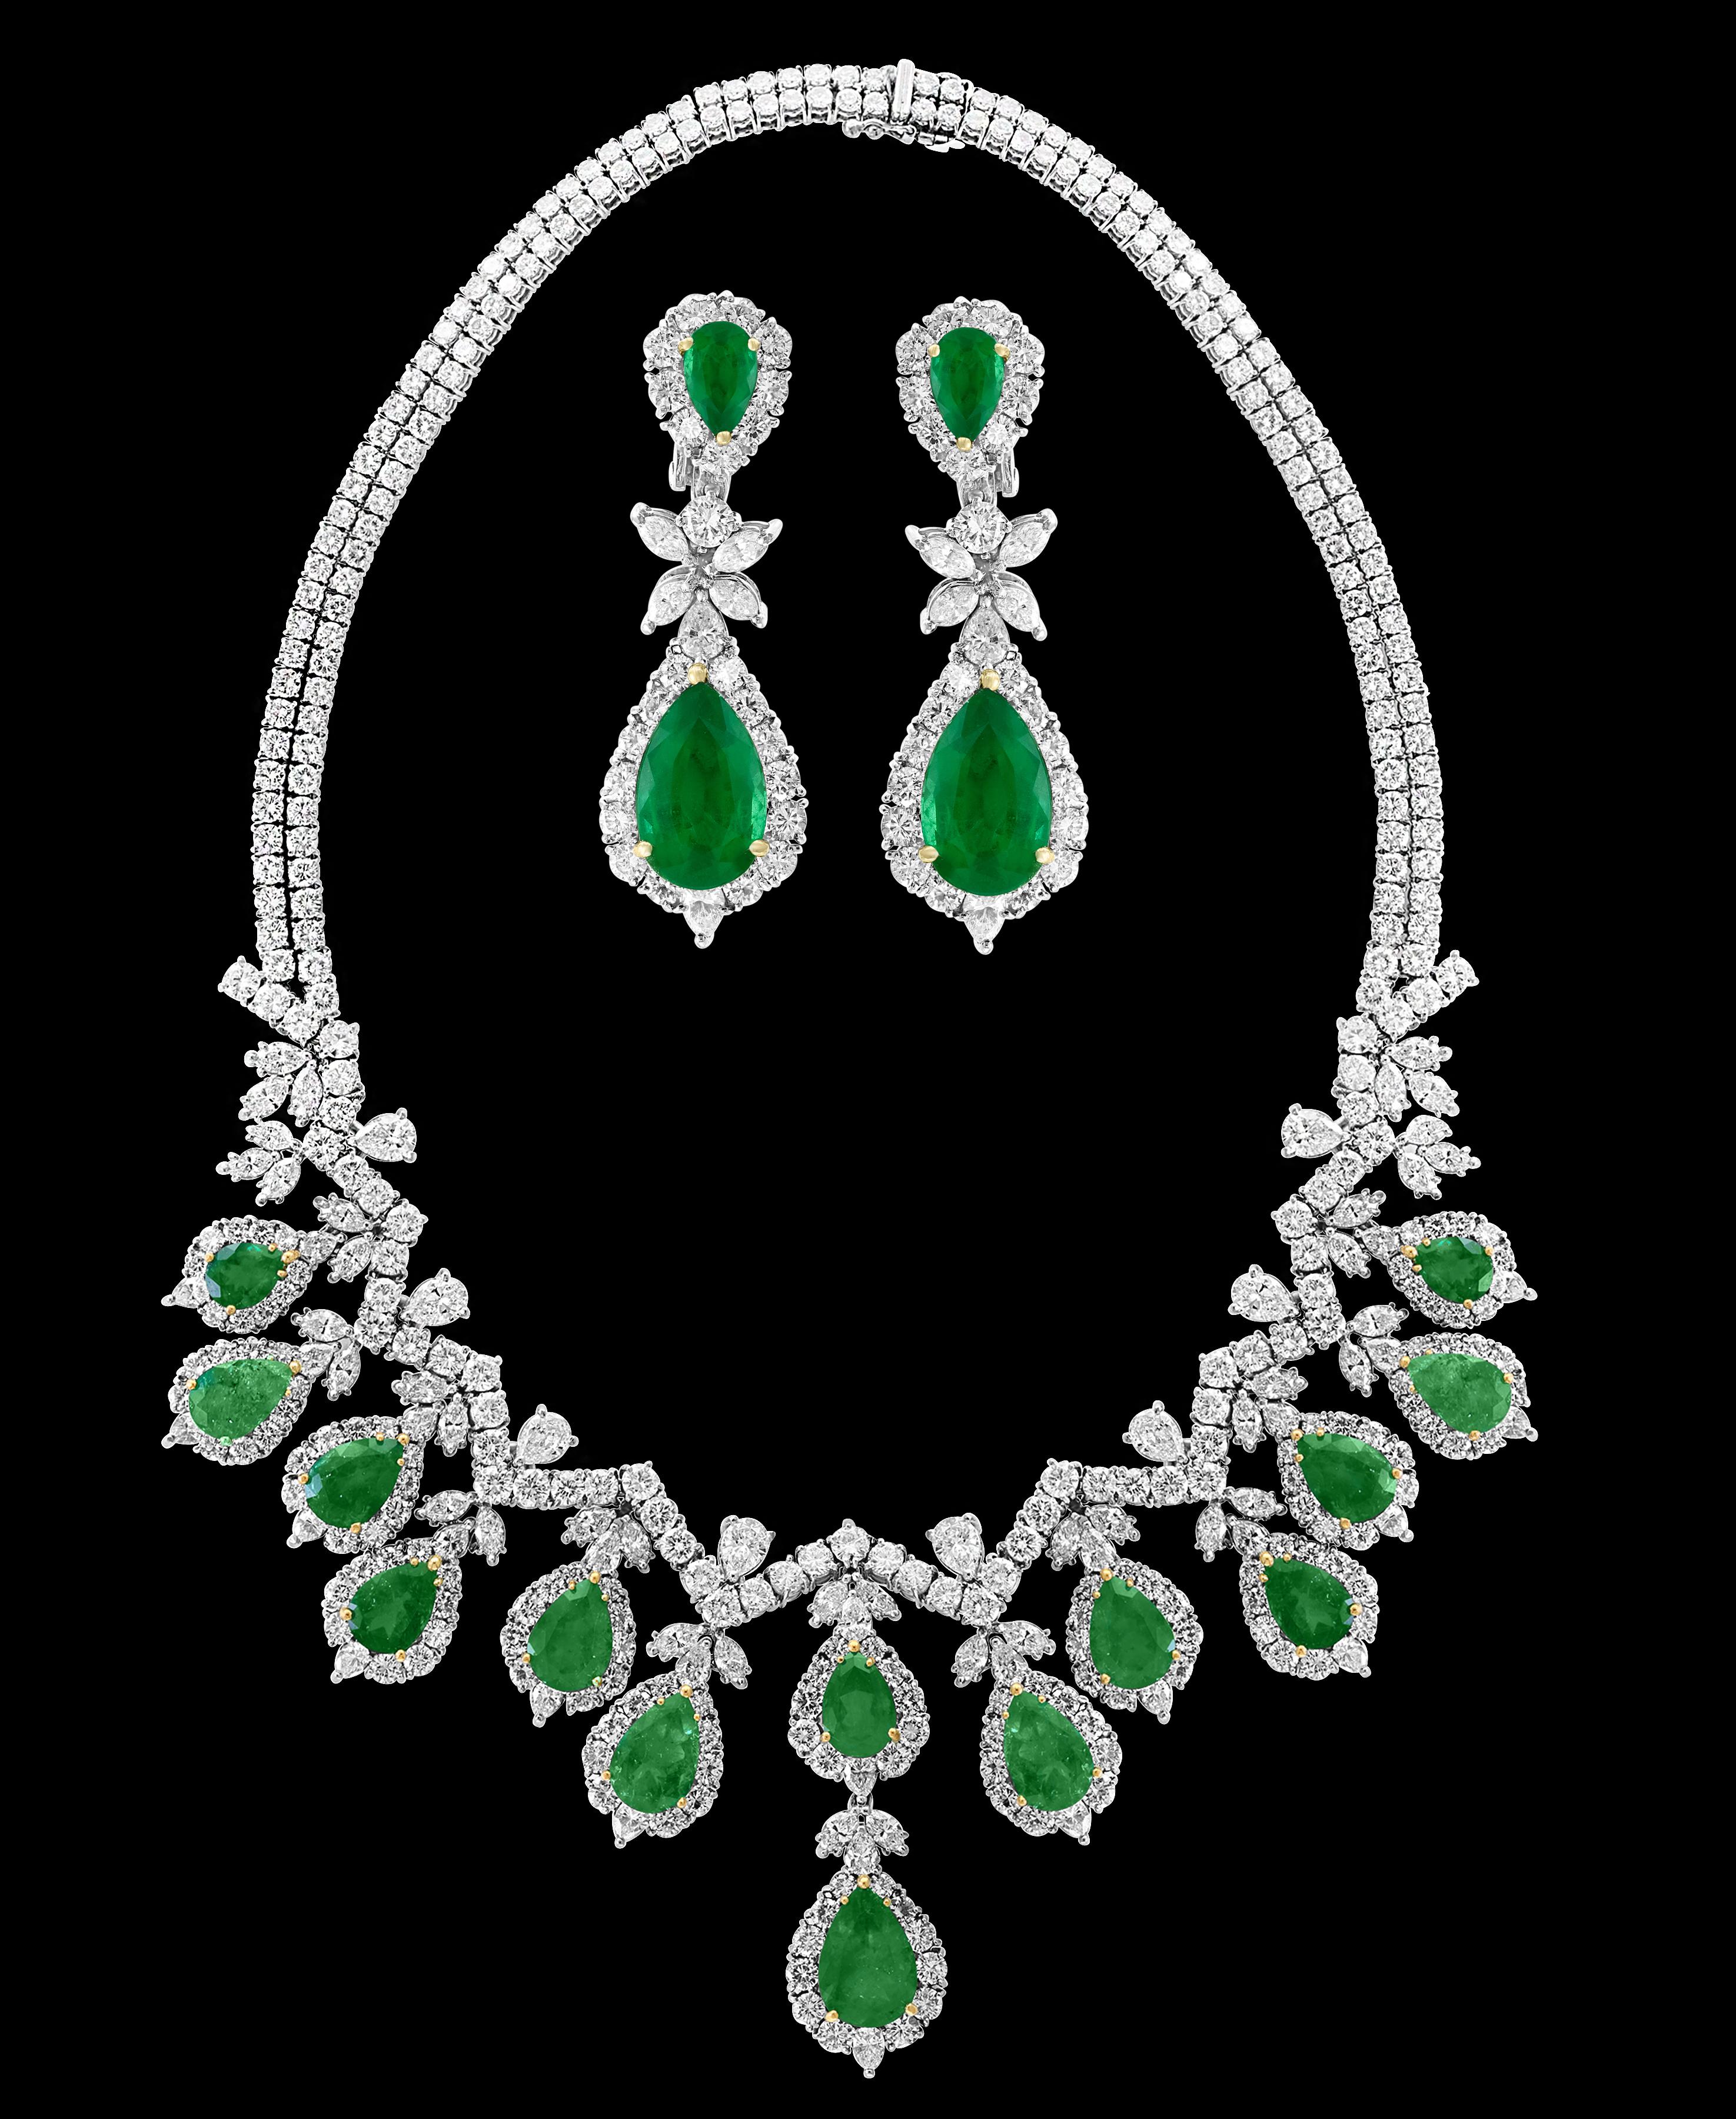 diamond necklace and earrings